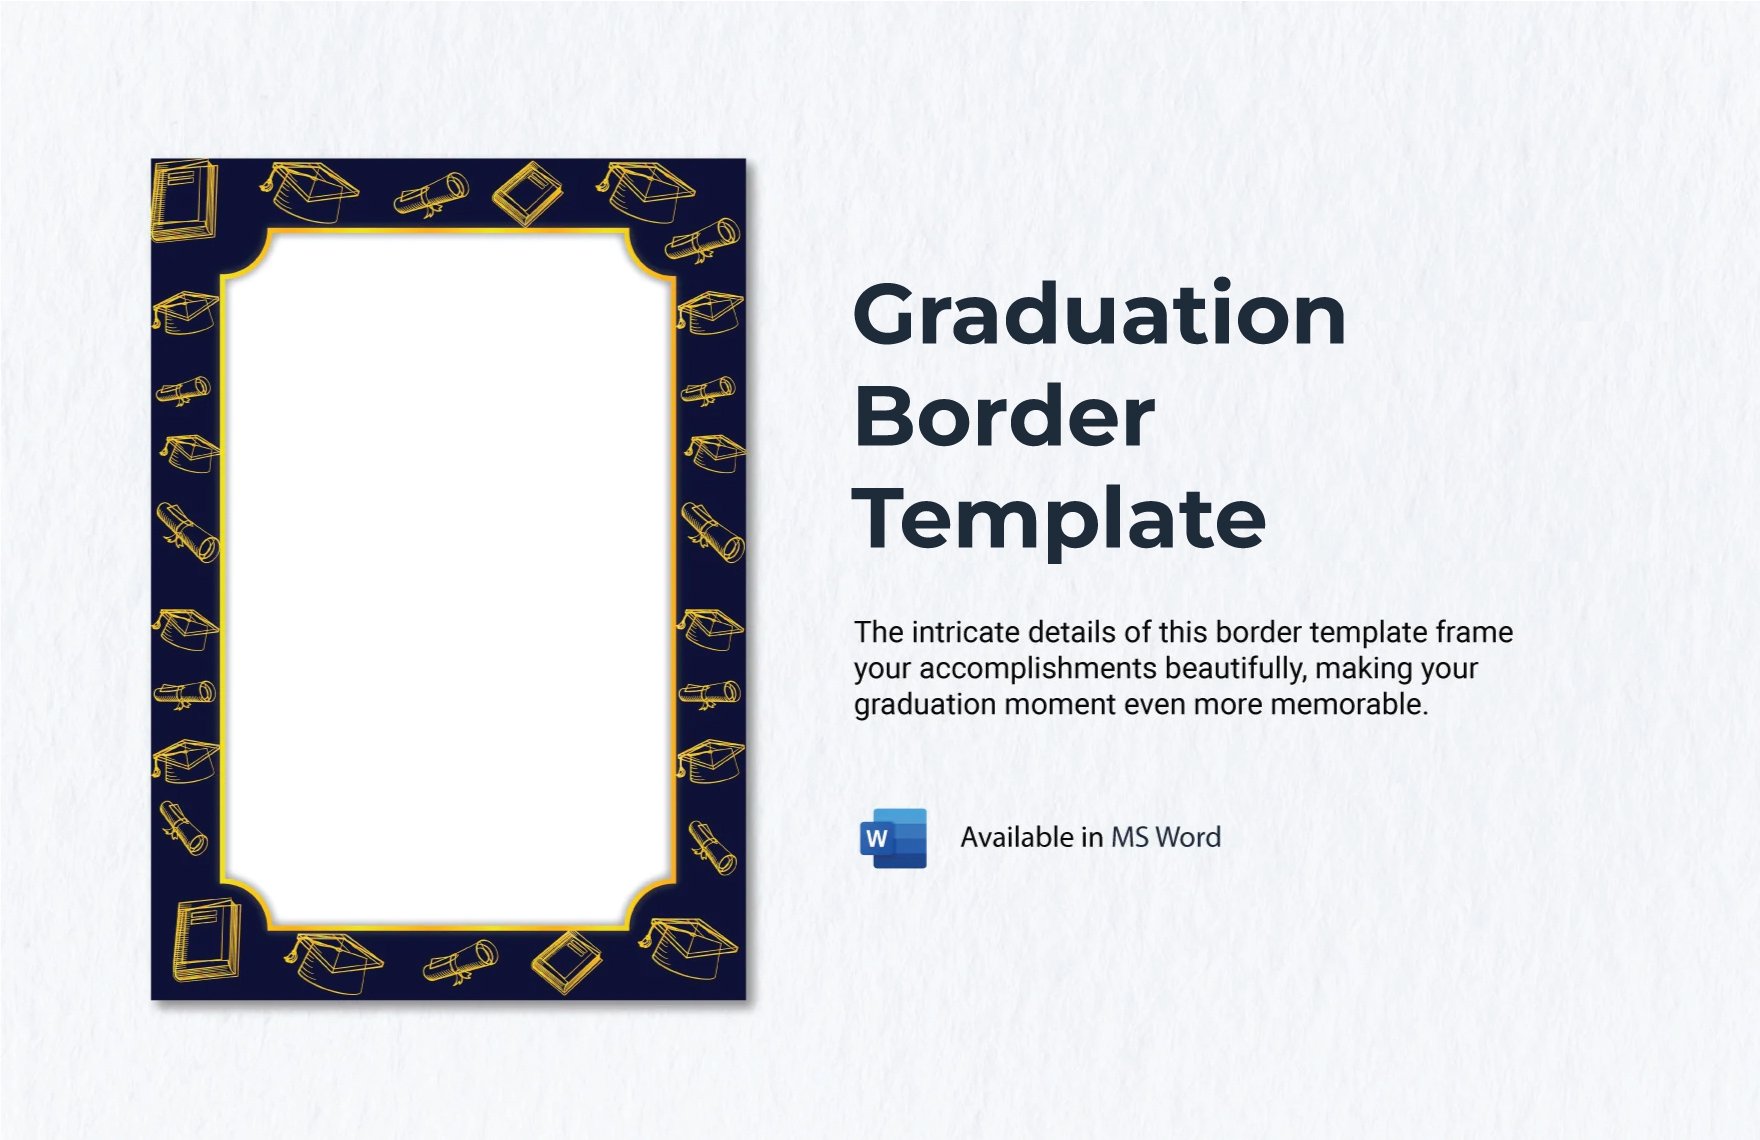 Free Graduation Border Template in Word